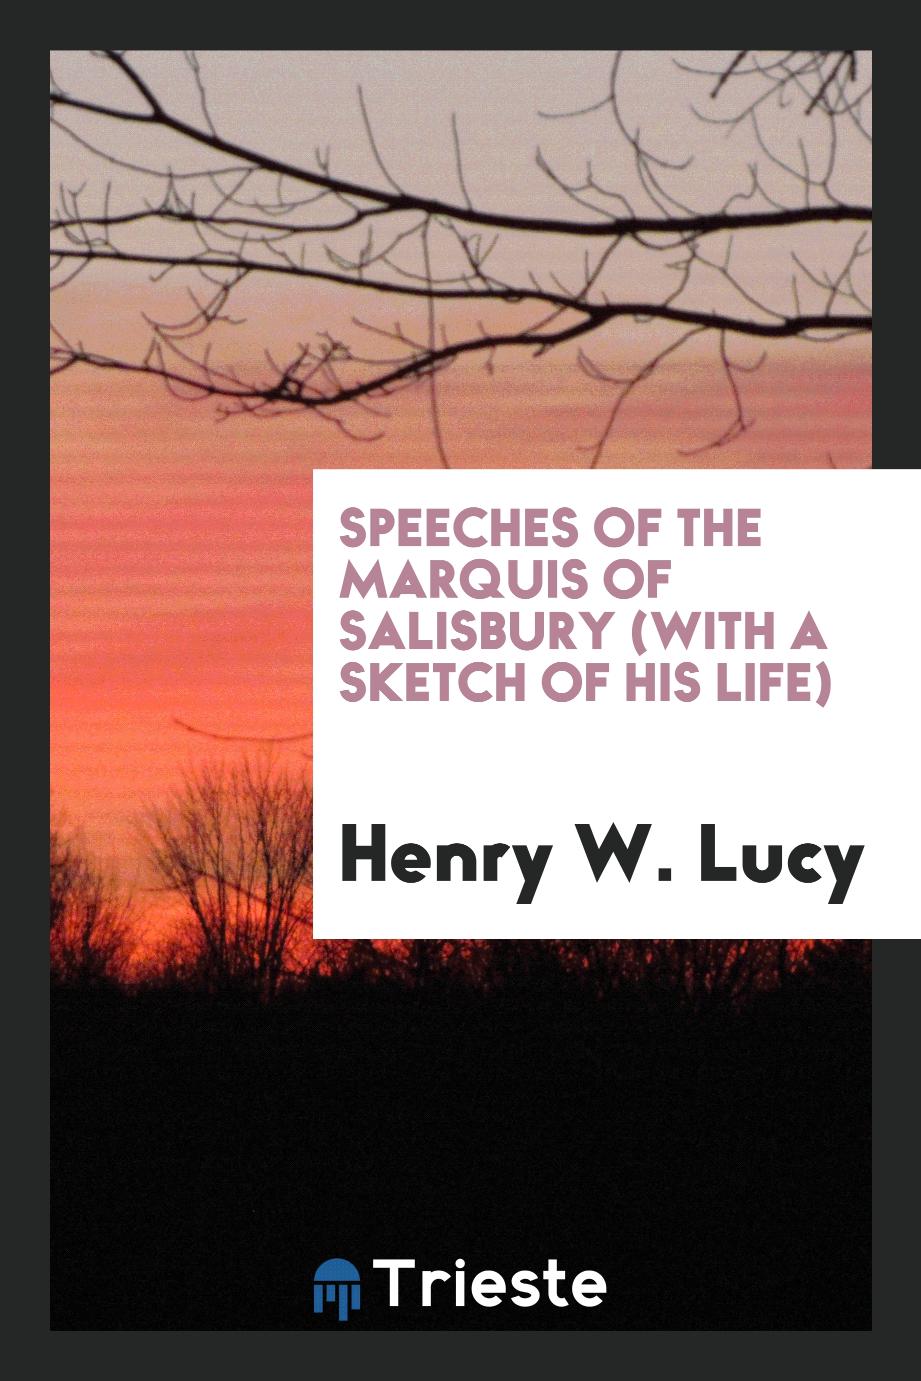 Speeches of the Marquis of Salisbury (with a sketch of his life)